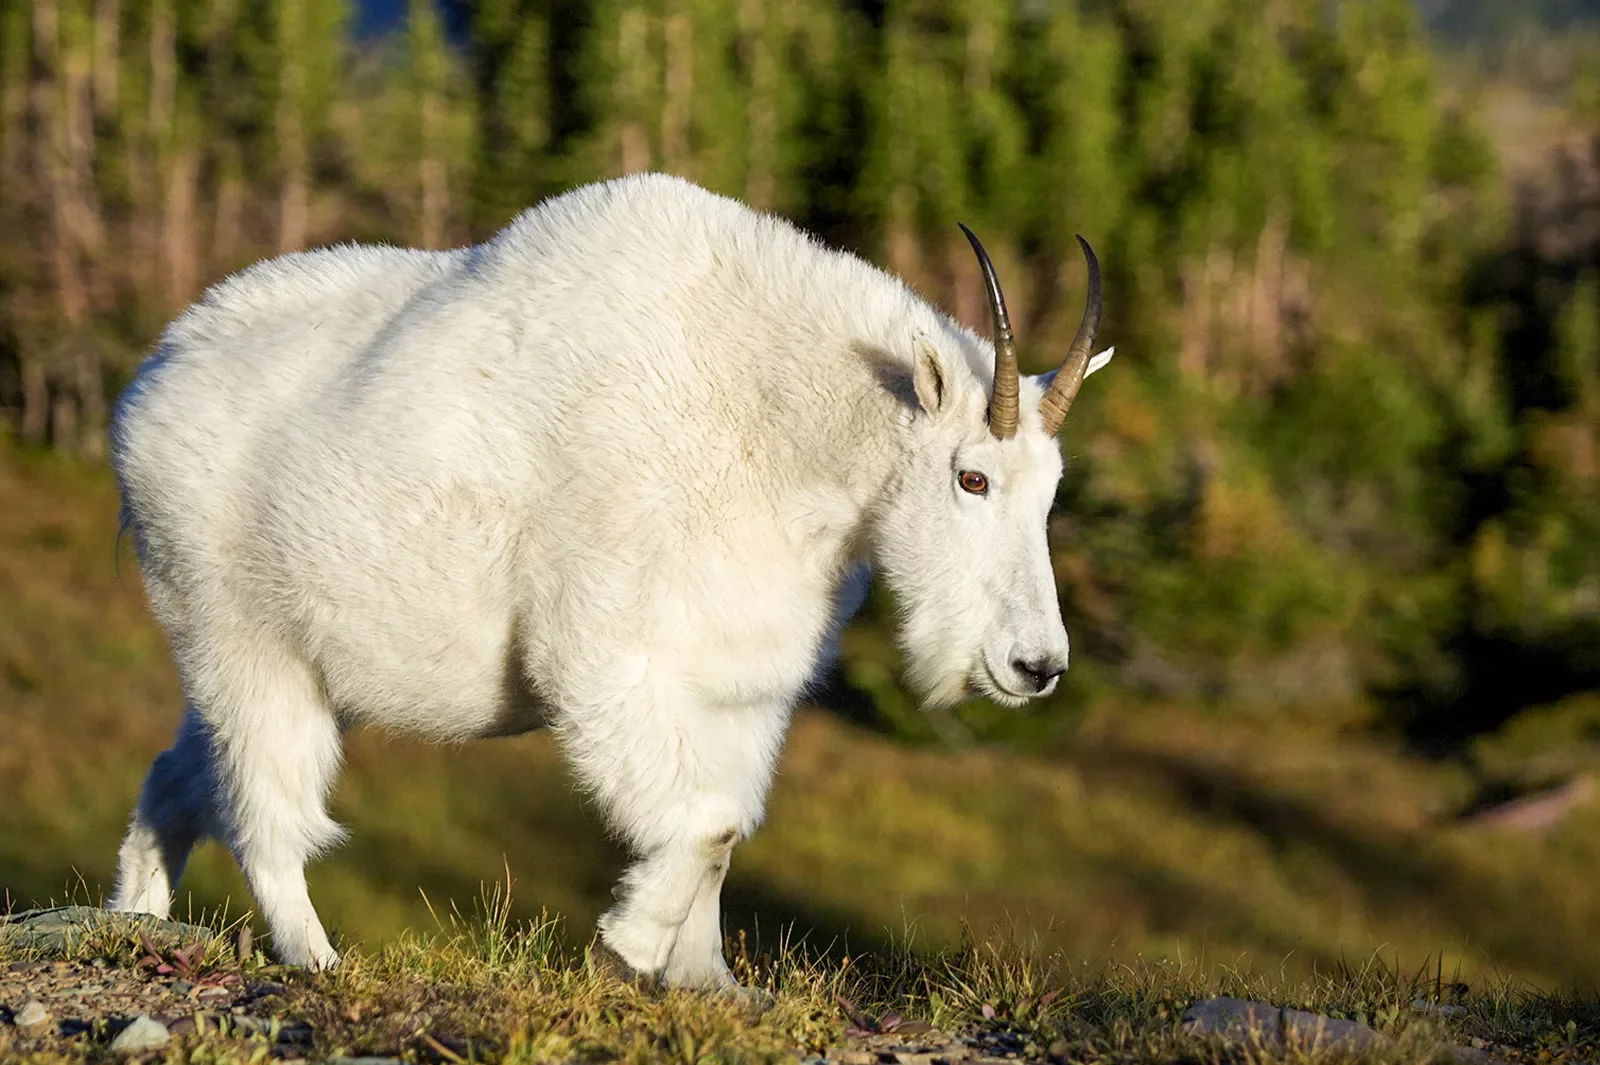 White ram with red eyes in the middle of a forest